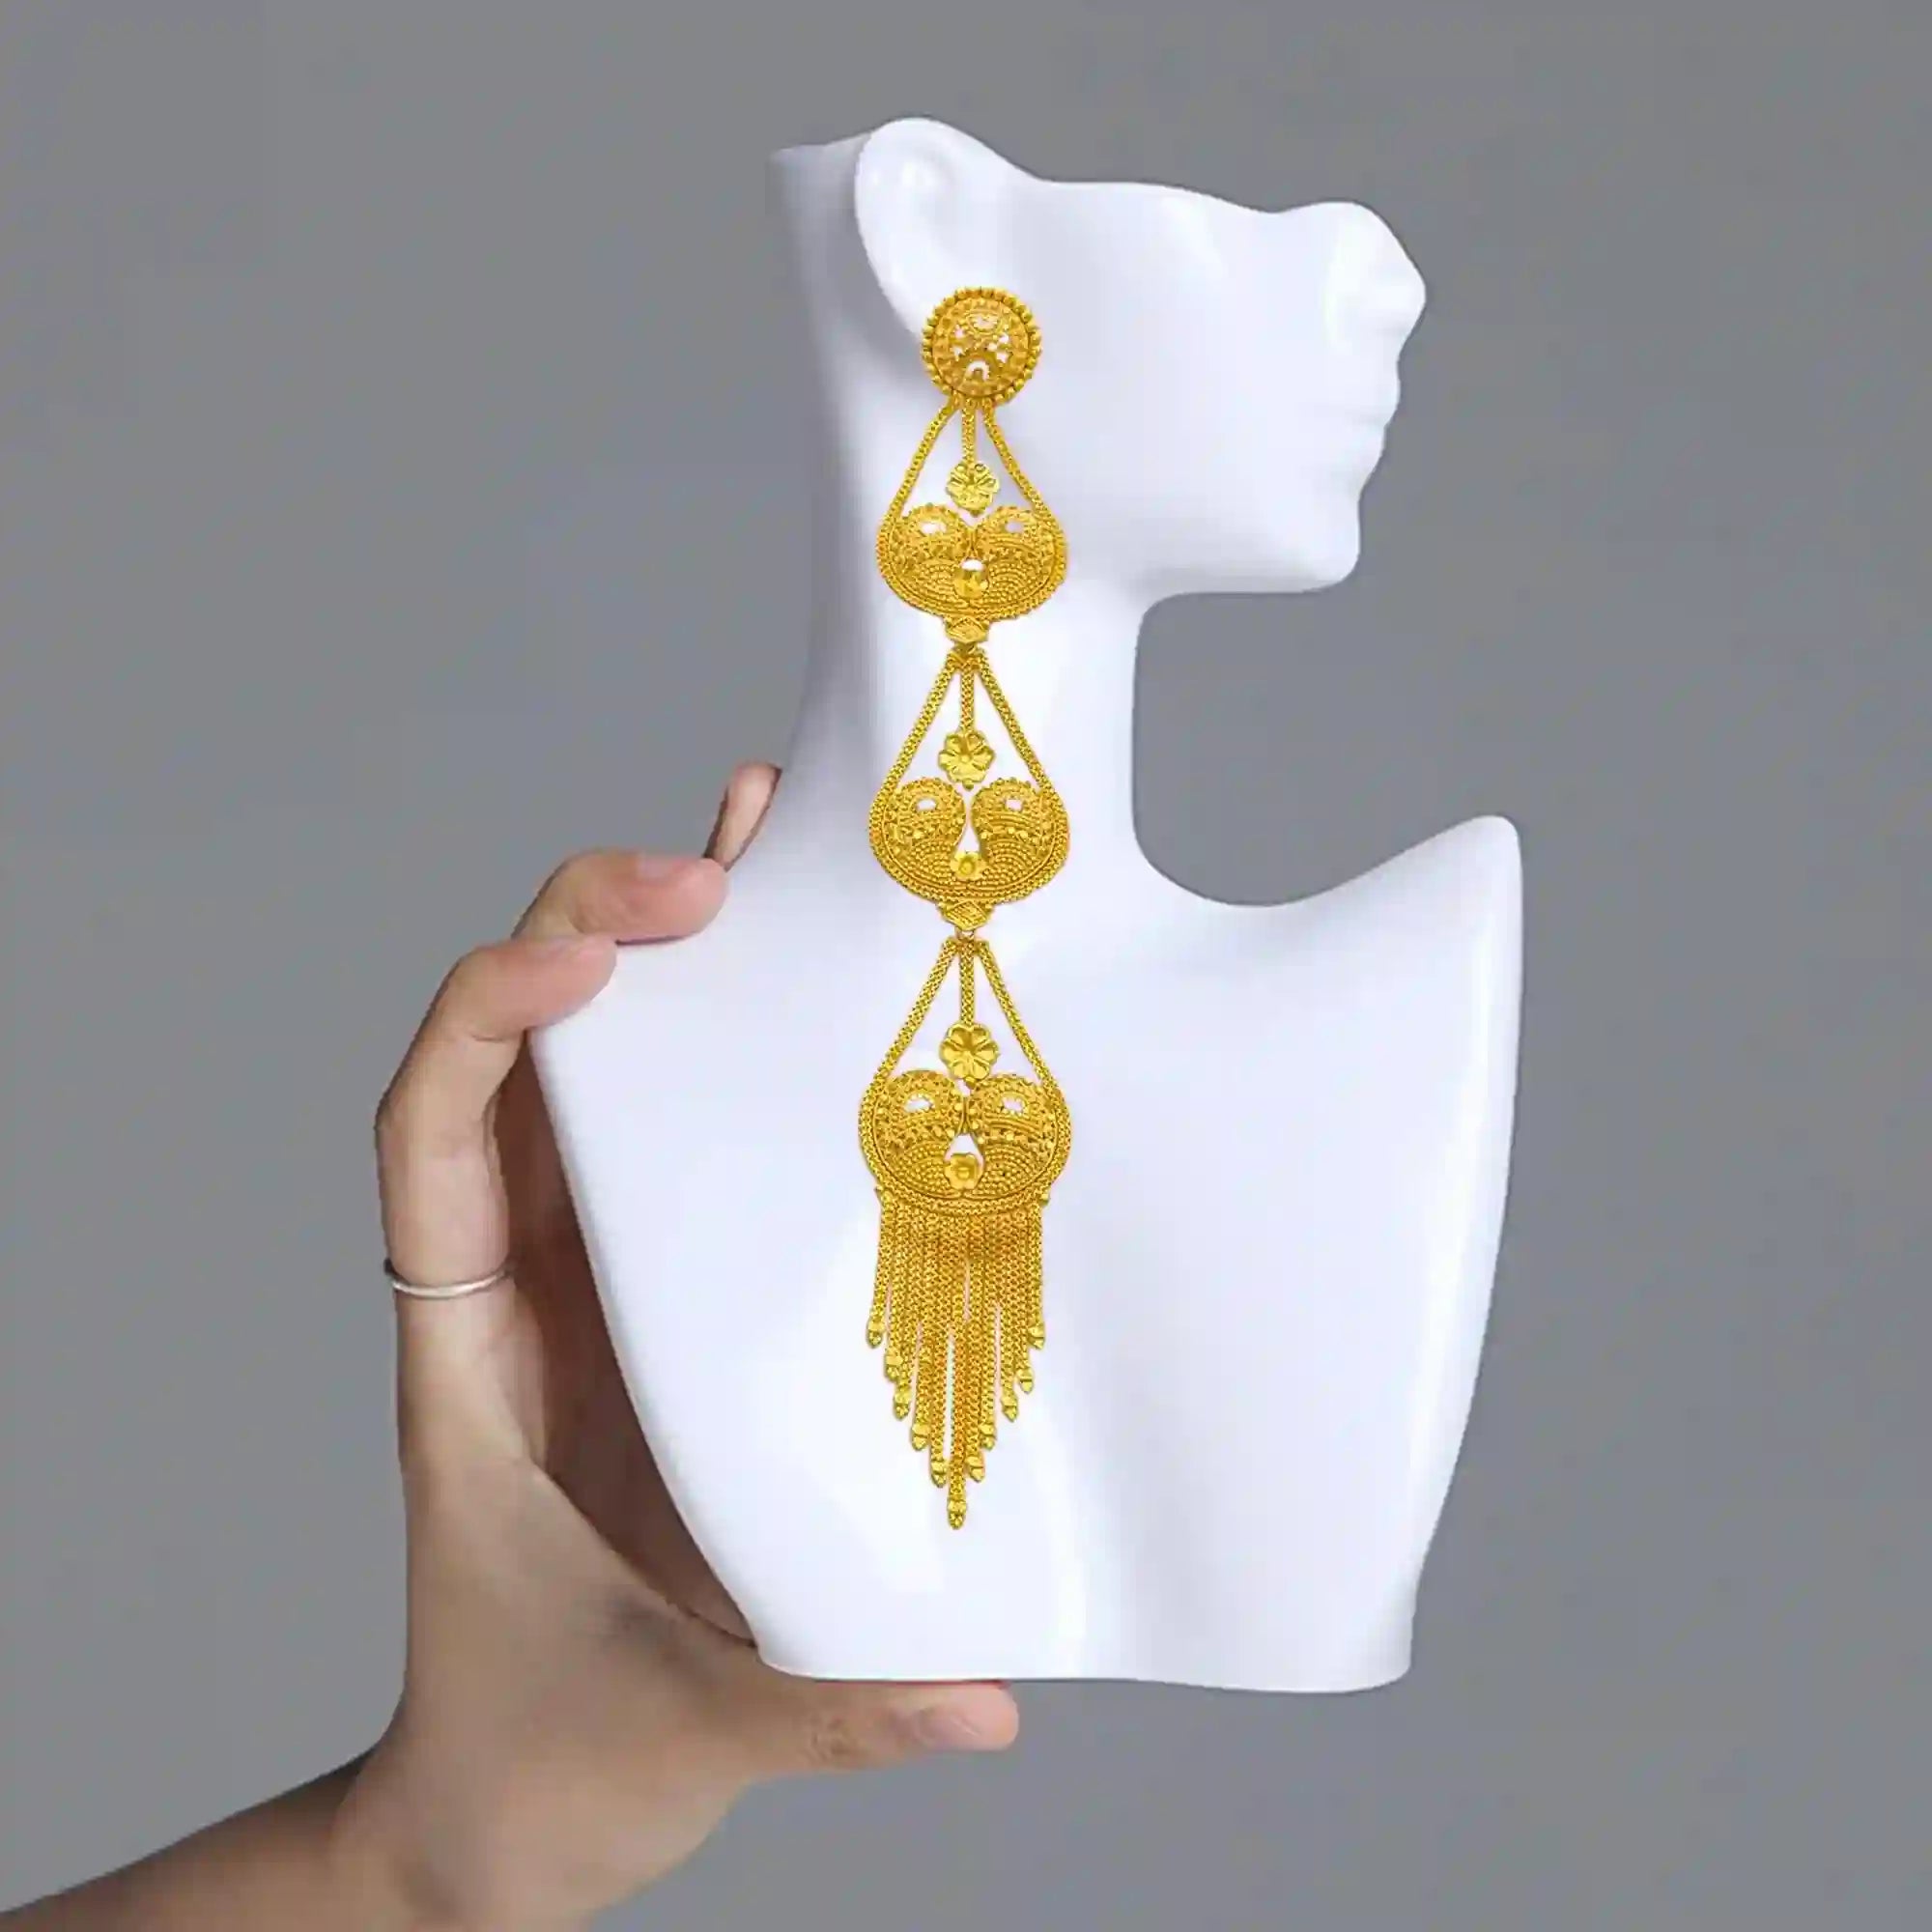 Gold-Plated Earrings, Gold-Plated Jewelry, Statement Earrings, Indian Jewelry Mall